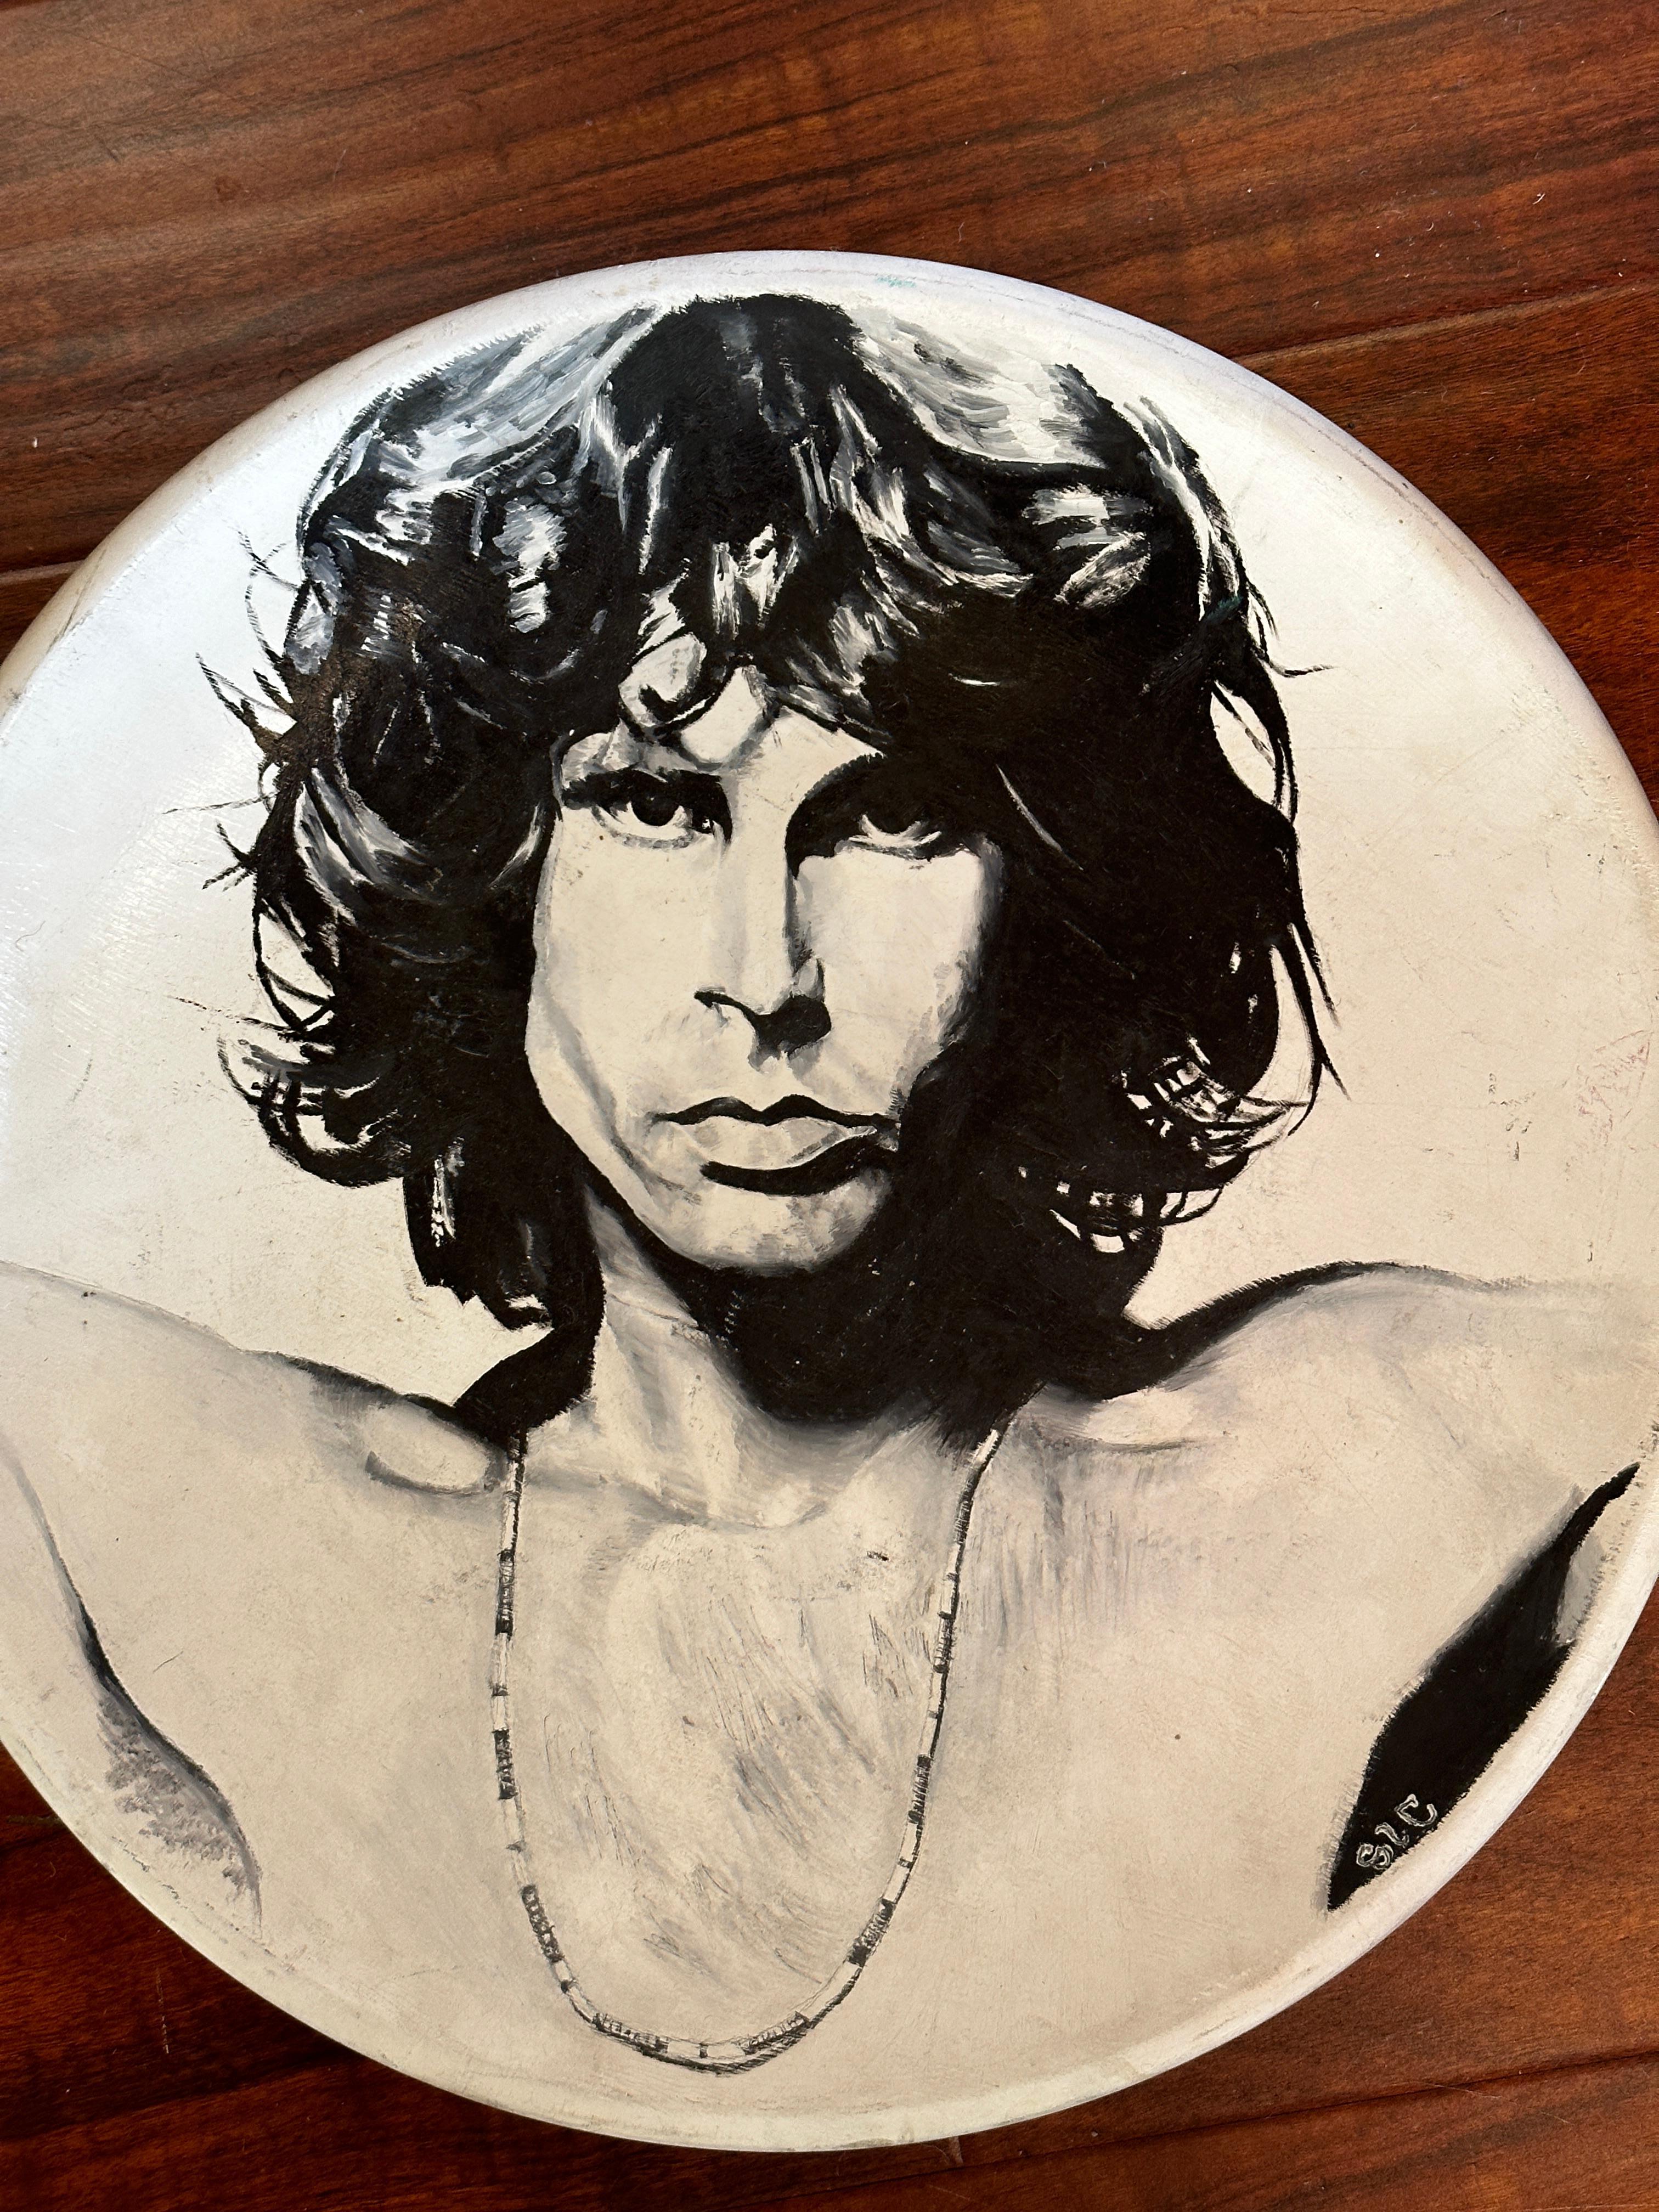 This acrylic-painted ceramic plate features a reproduction of one of photographer Joel Brodsky's iconic portraits of Jim Morrison. The artist depicts Morrison's striking features true to the original photo, his intense gaze, long hair, and